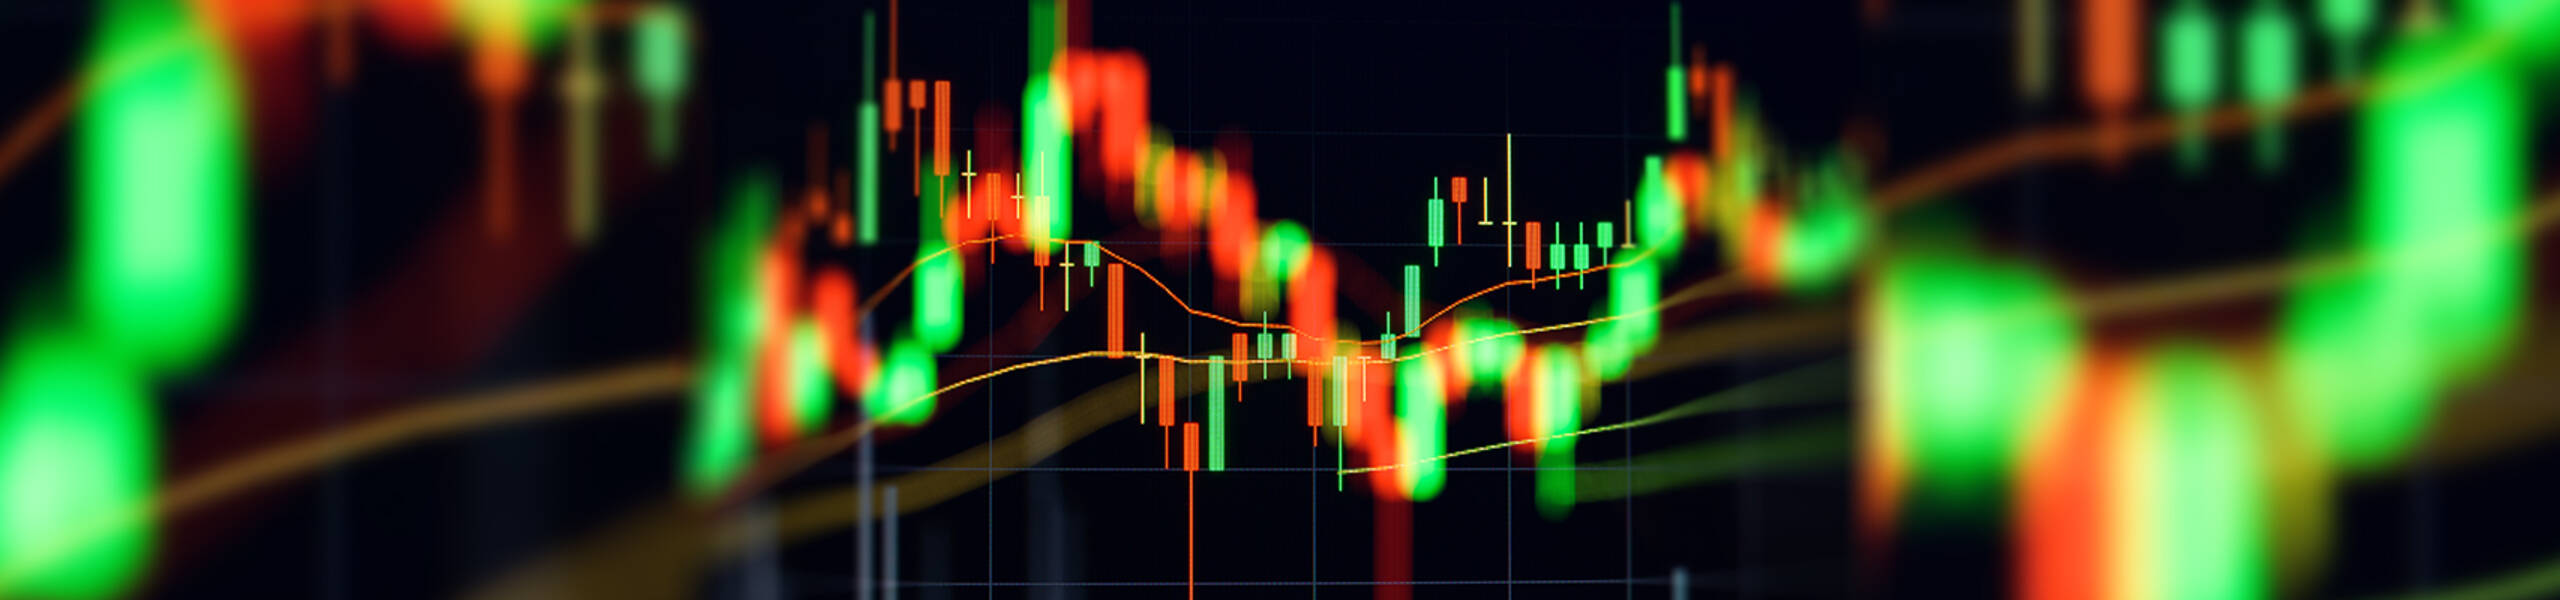 Bitcoin (BTC/USD) looks for another leg lower